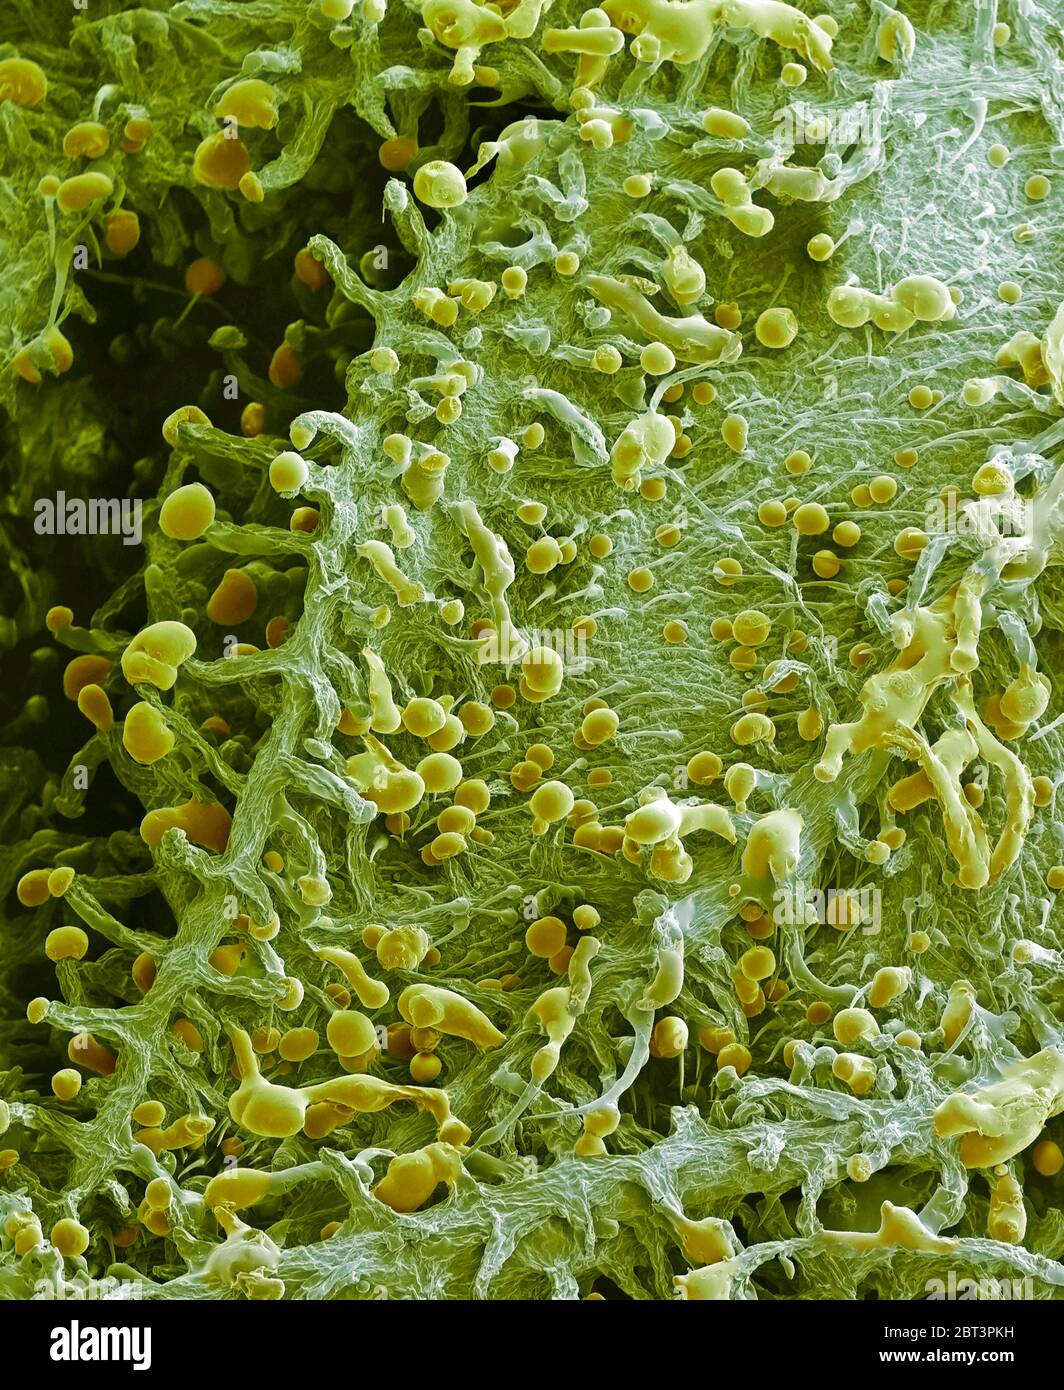 Cannabis plant. Coloured scanning electron micrograph (SEM) of the surface of a cannabis (Cannabis sativa) plant. The pointed hairs are called lithocyst cells. They contain cystoliths (calcium carbonate crystals). Glandular cells called trichomes are also present. These are capitate trichomes that have stalks. These trichomes secrete a resin (yellow) containing tetrahydrocannabinol, the active component of cannabis when used as a drug. Magnification: 220X when printed 10 cm wide. Stock Photo